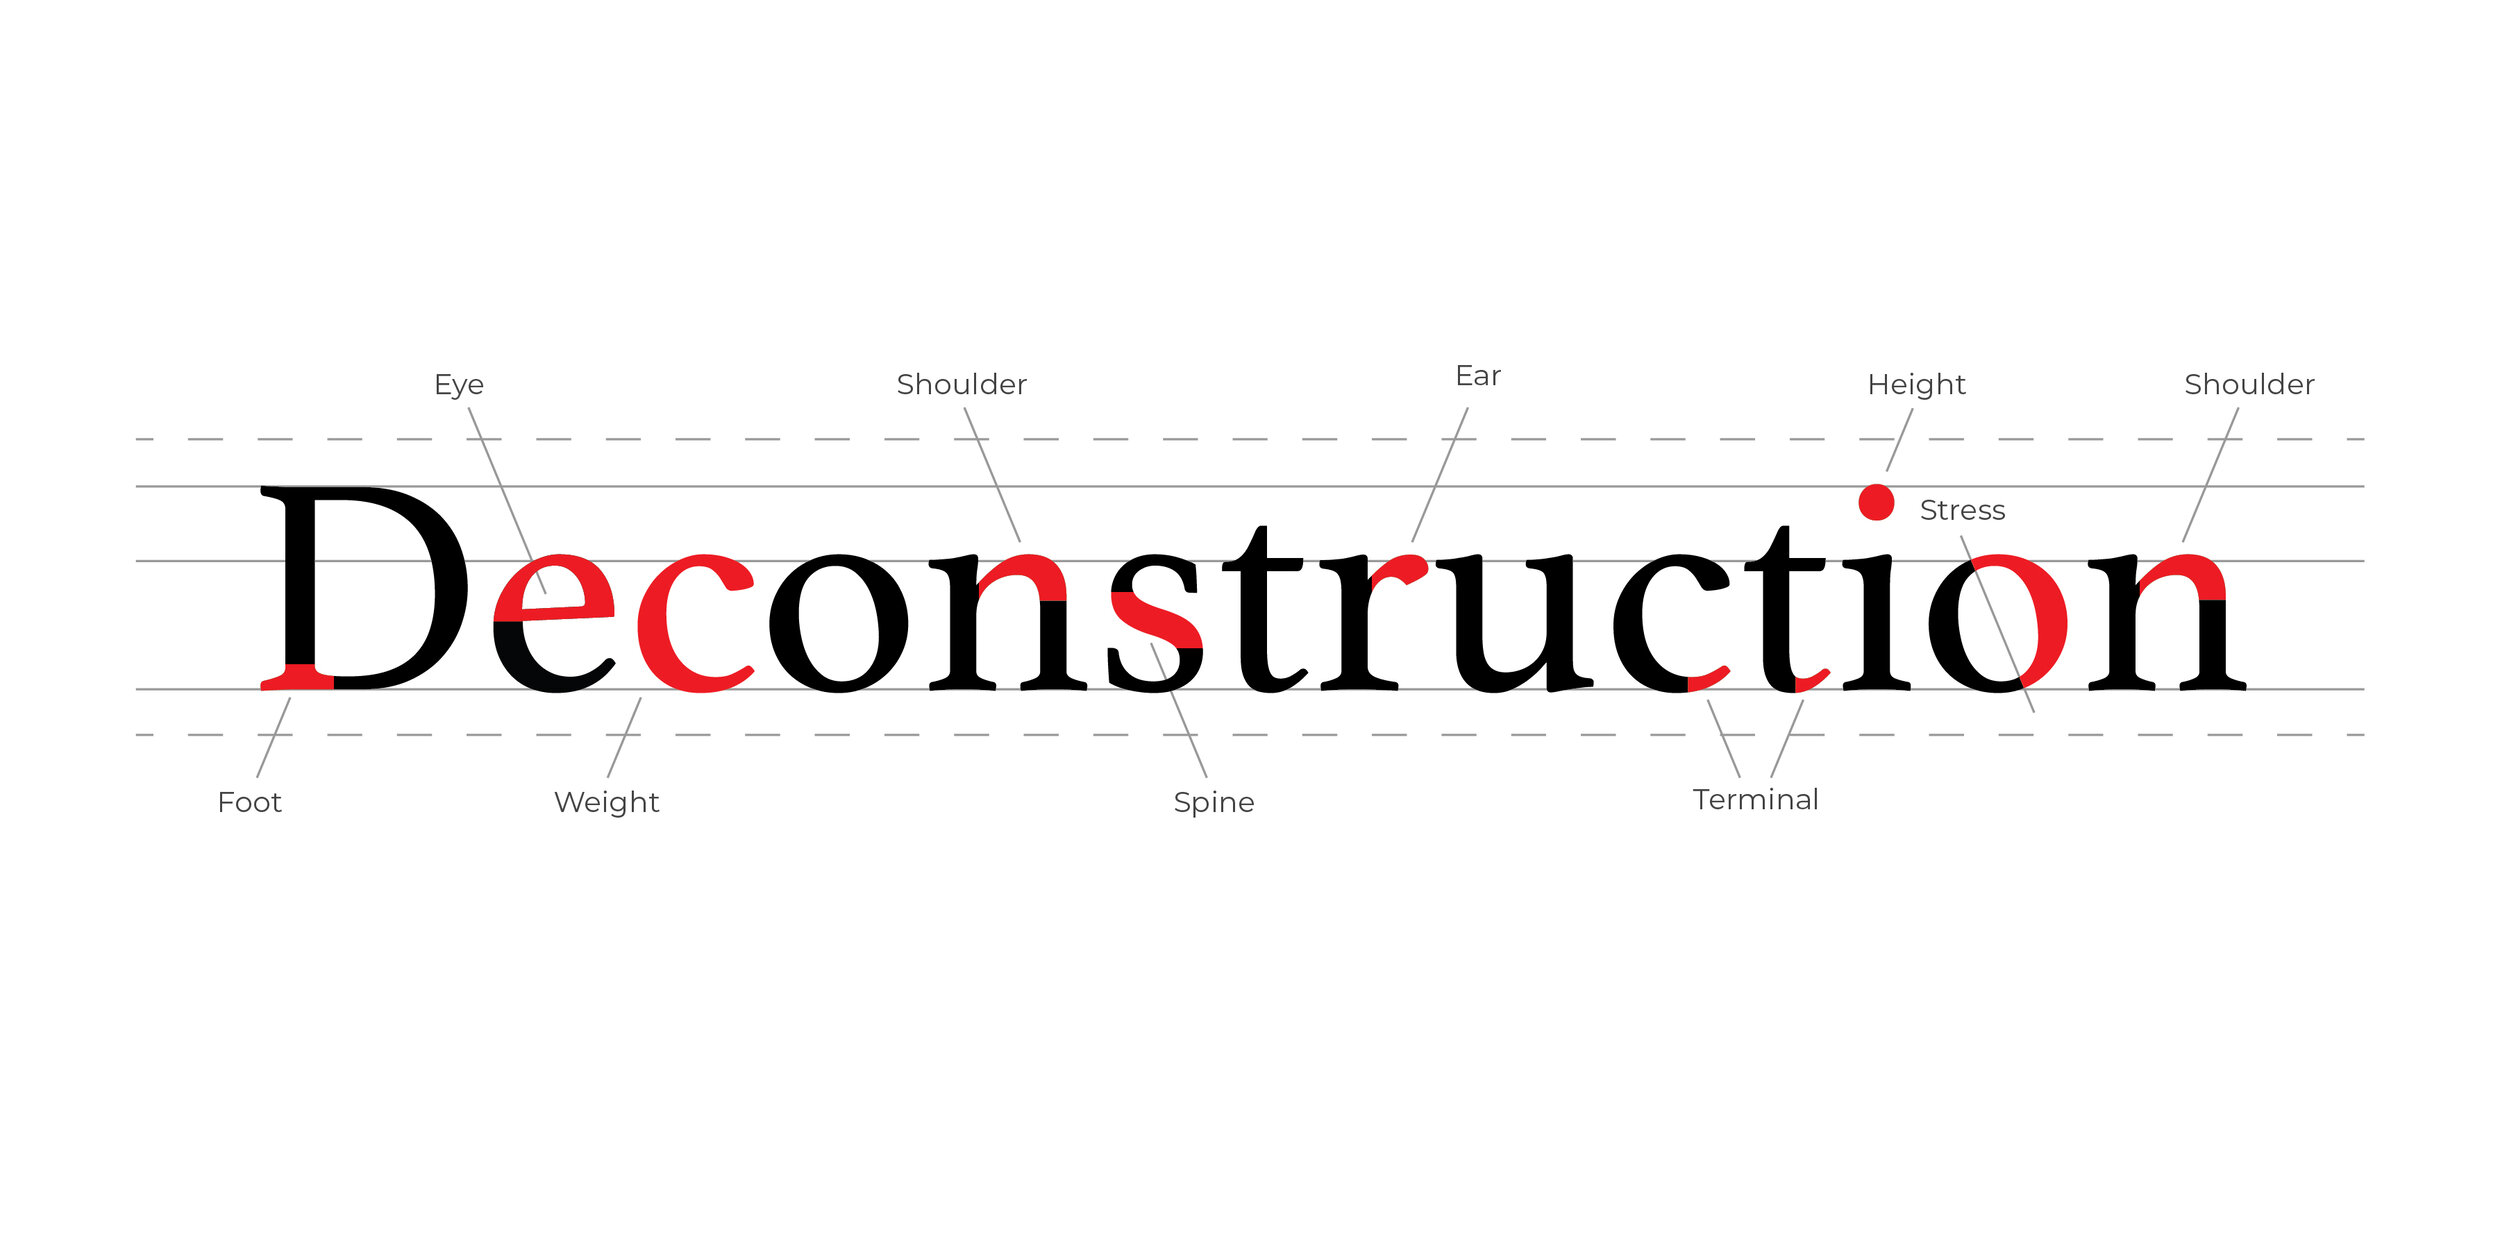  Logo for collective gallery show called “Deconstruction” 